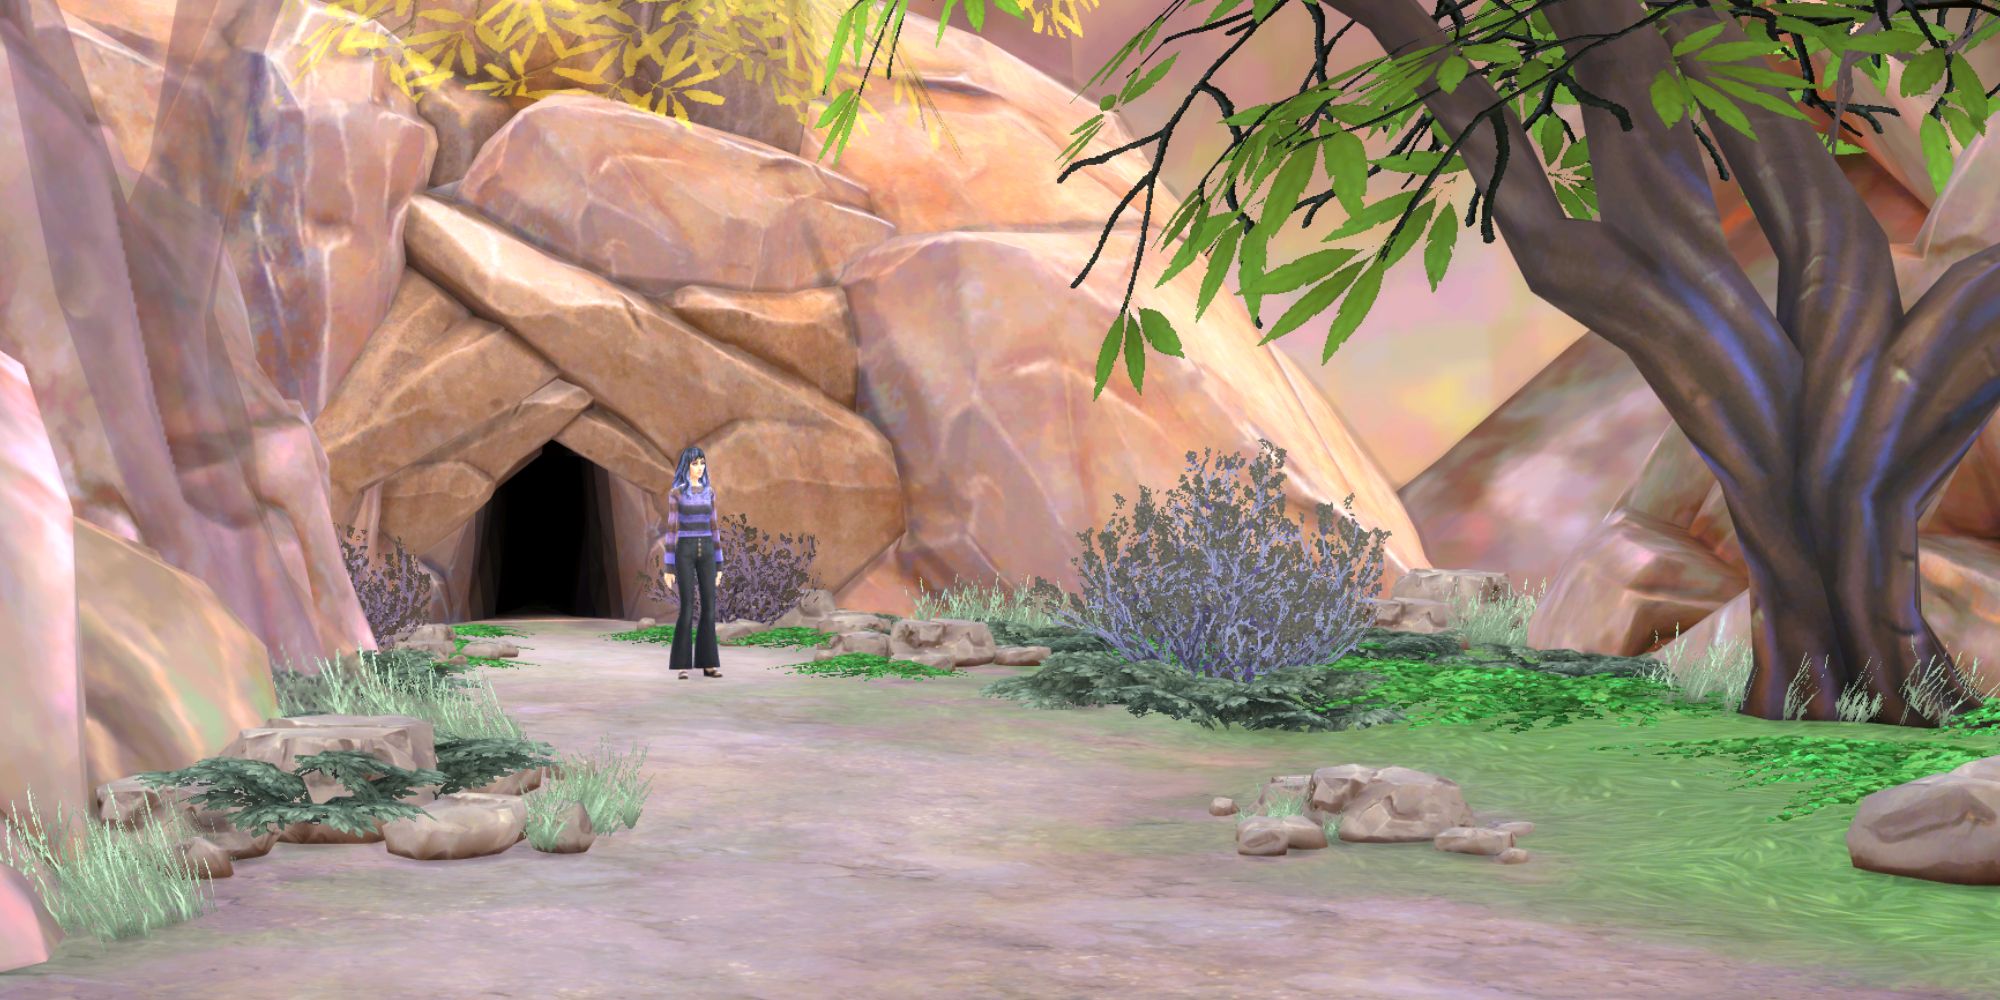 Sim in front of dreadhorse caverns